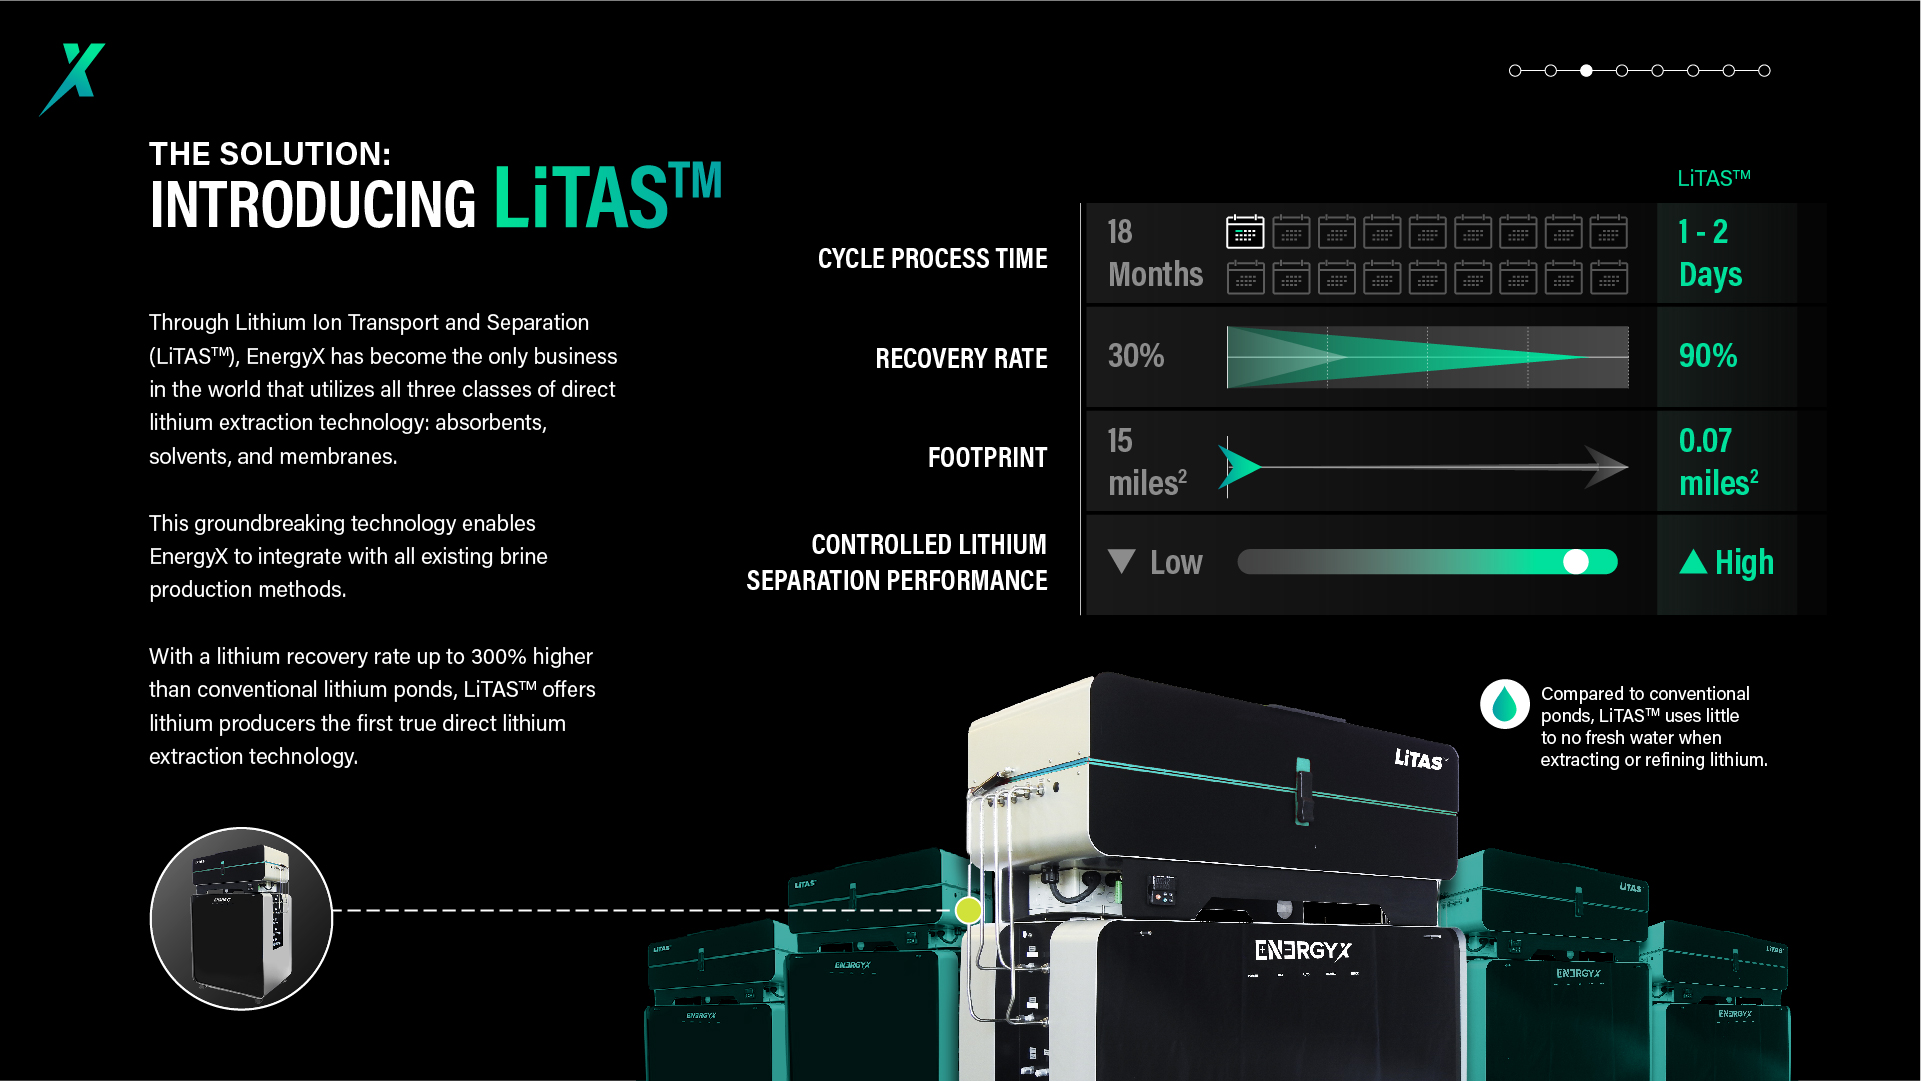 The graphic will show the EnergyX’s LiTASTM system as below: